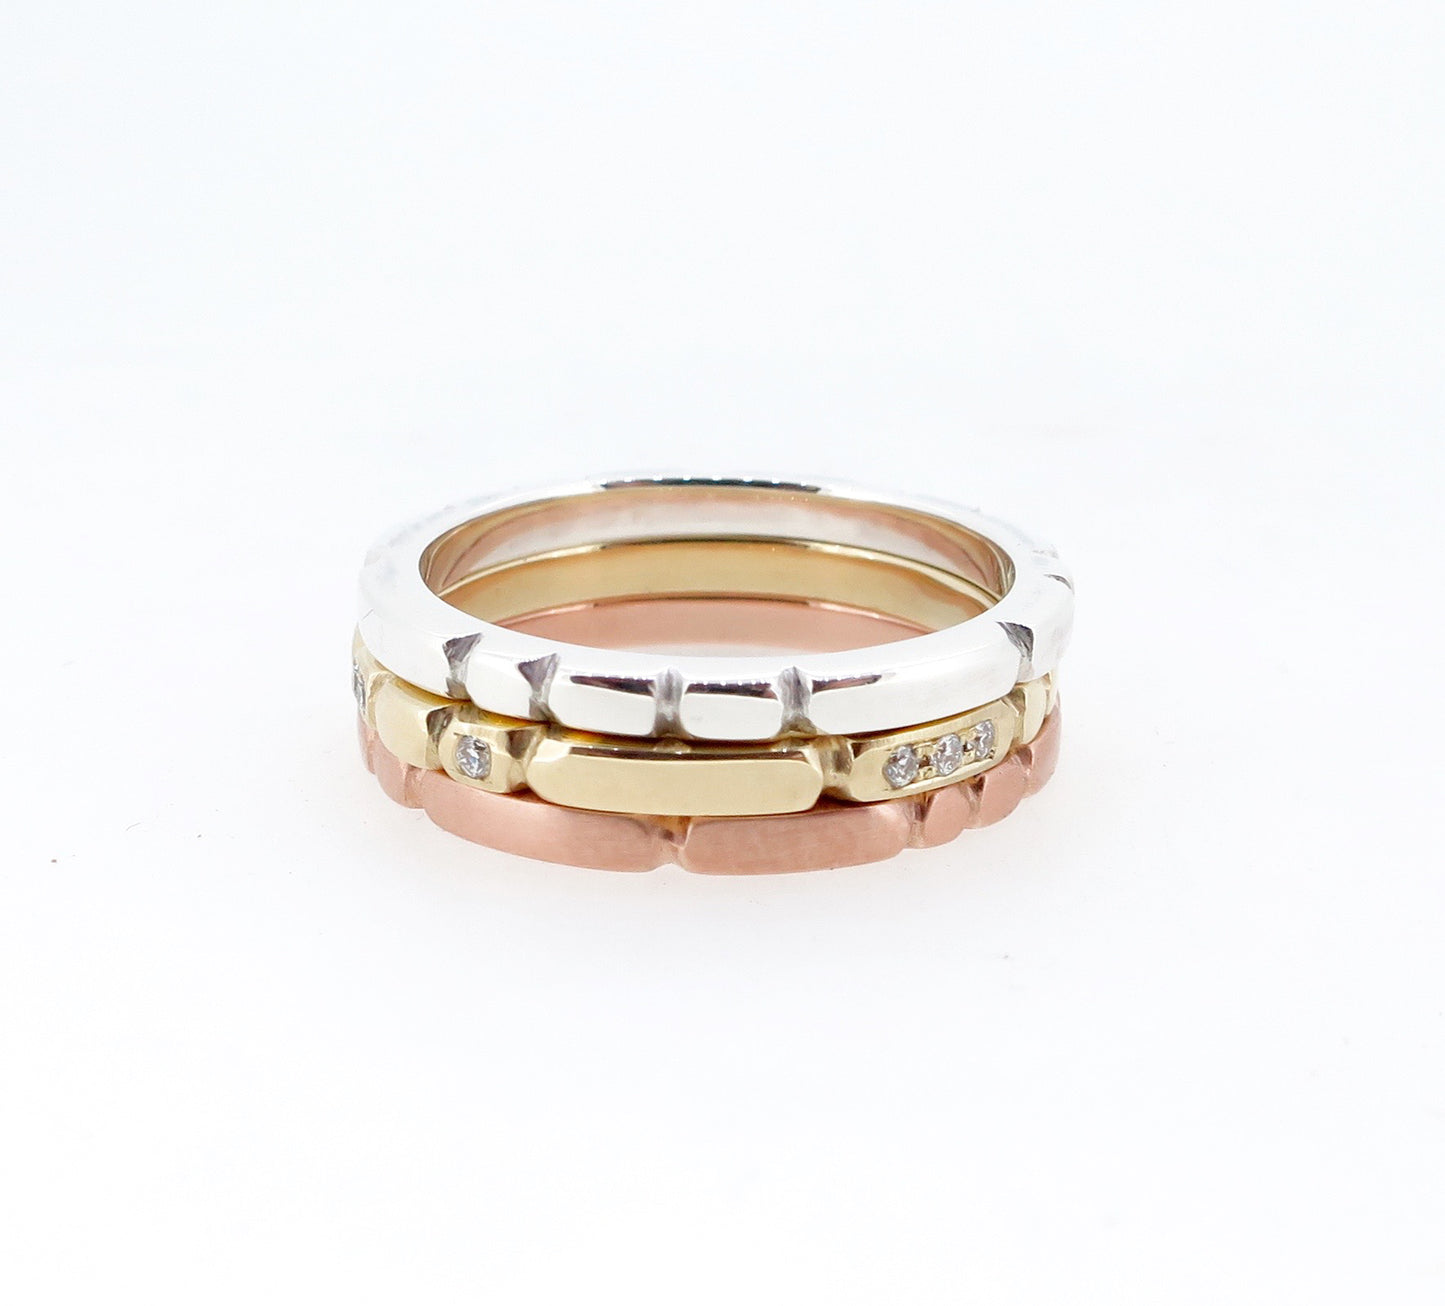 Sculpt gold band with diamonds